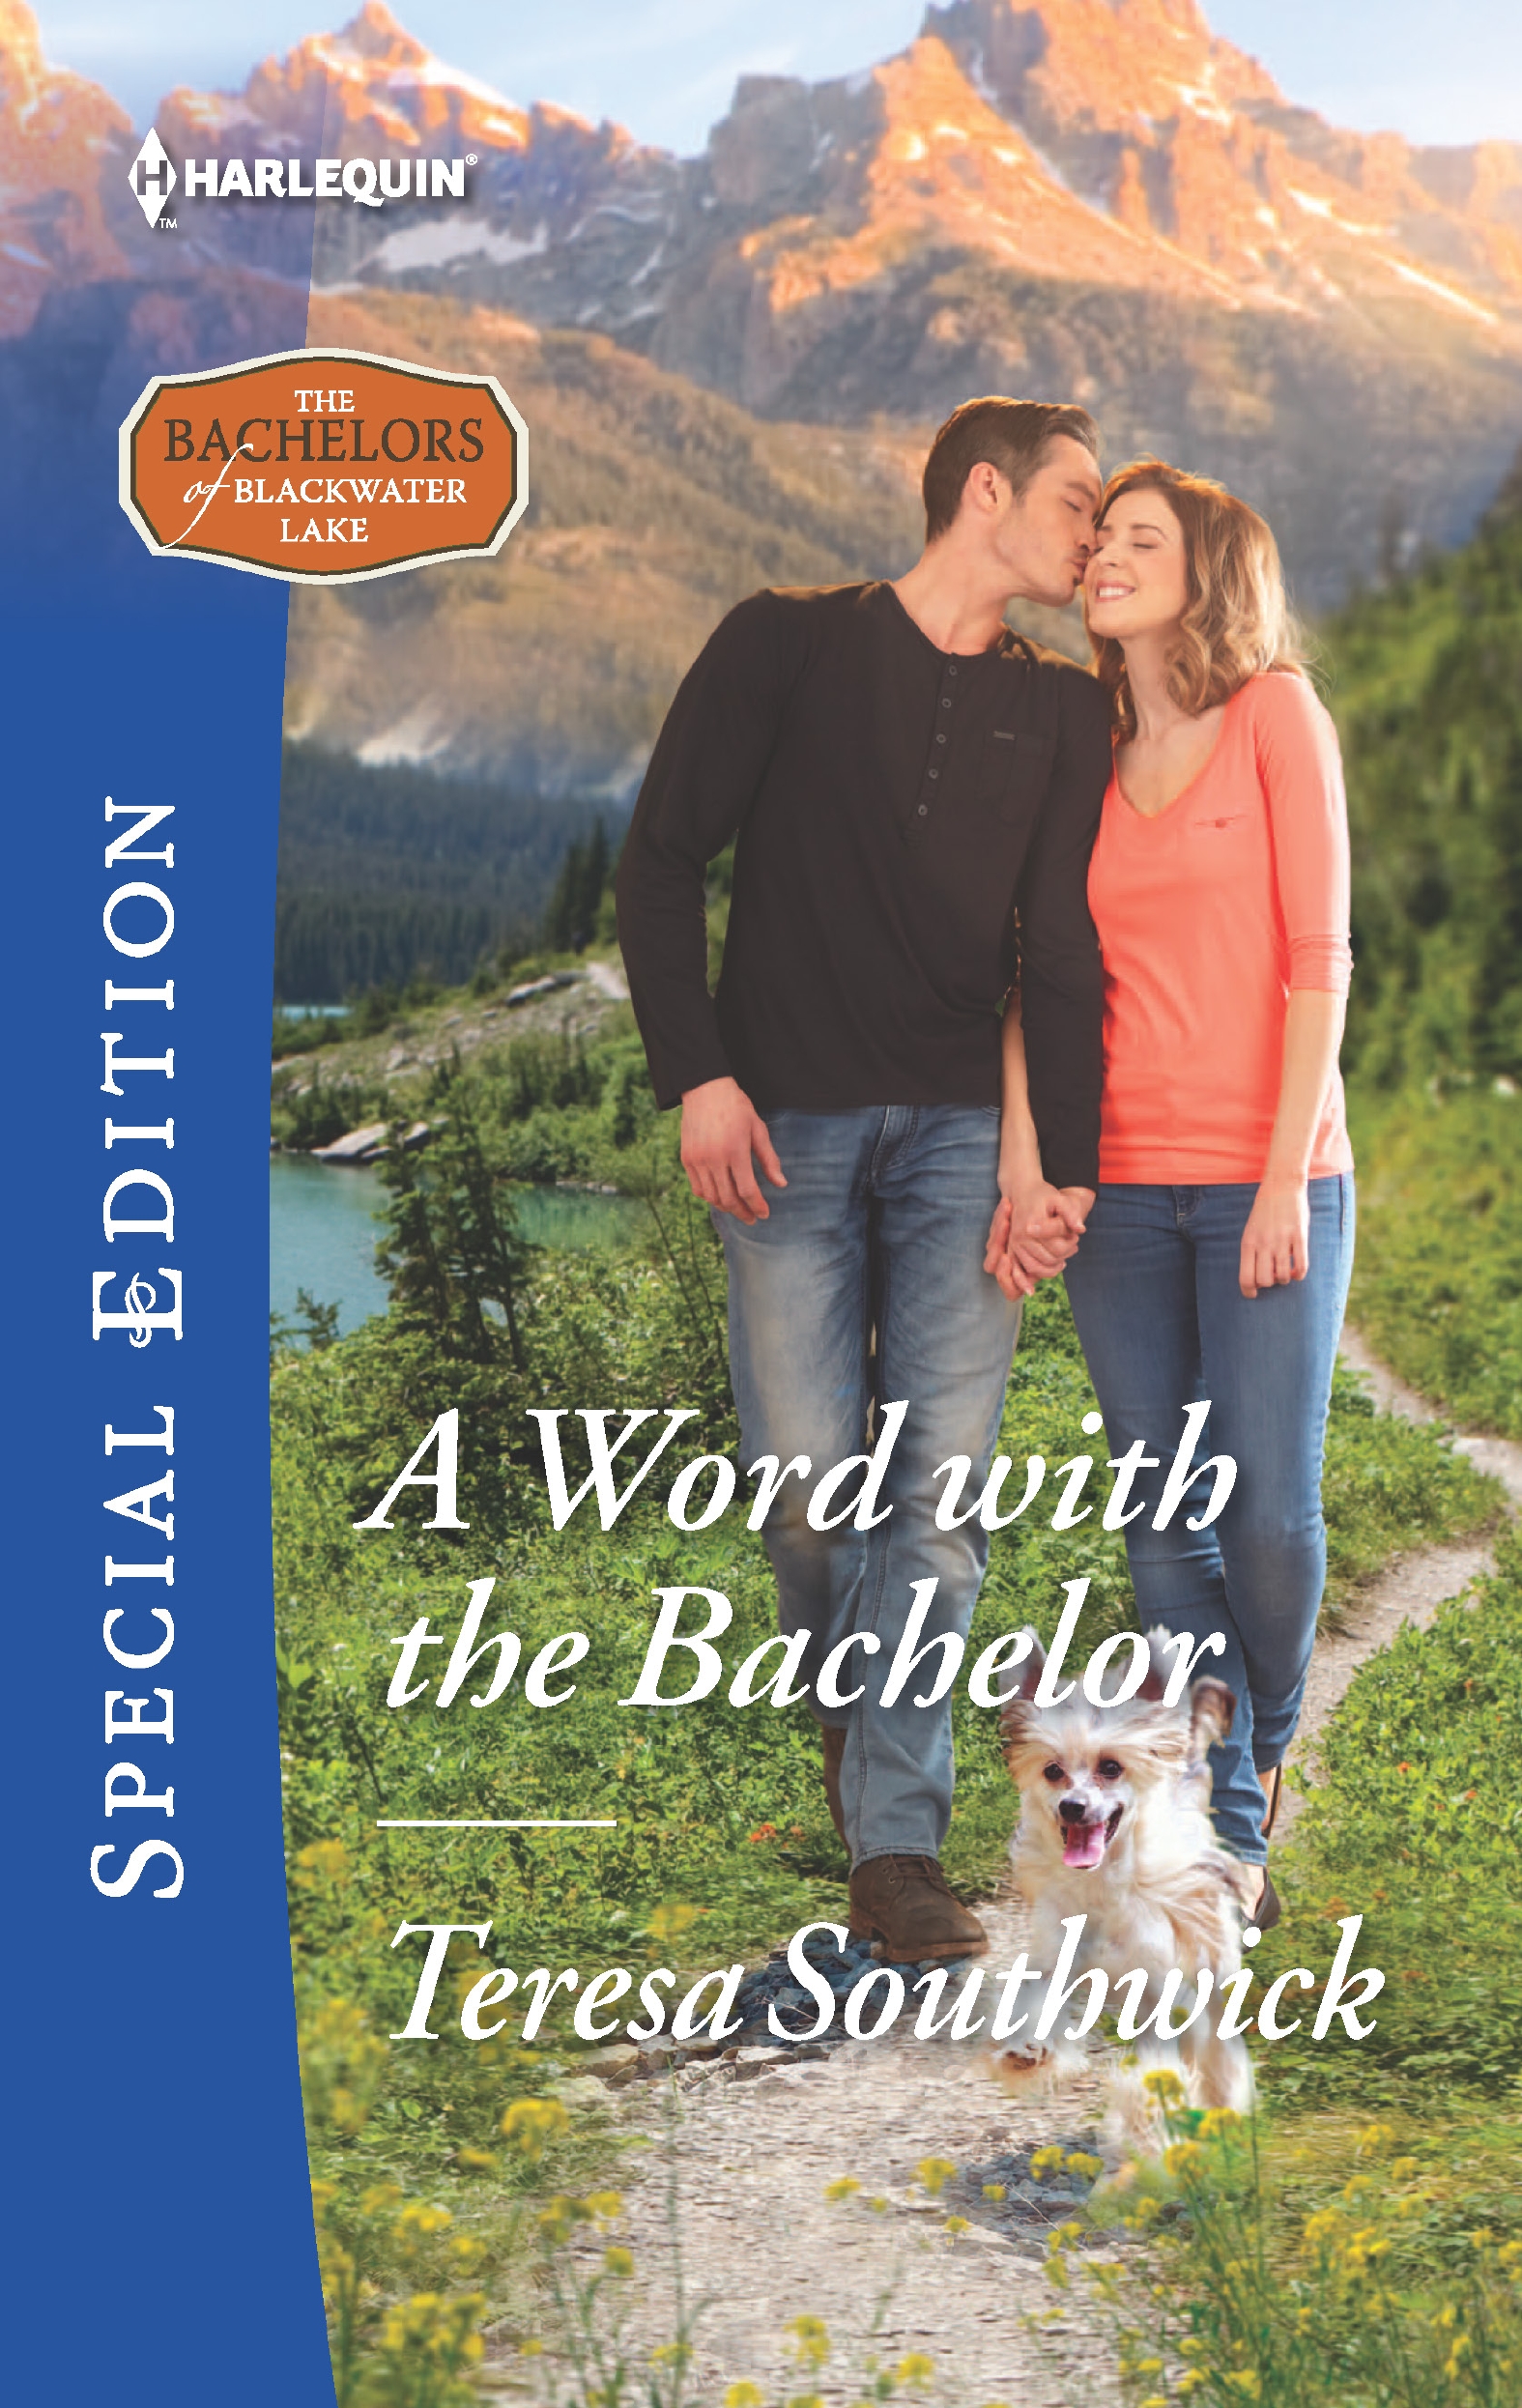 A Word with the Bachelor (2016) by Teresa Southwick